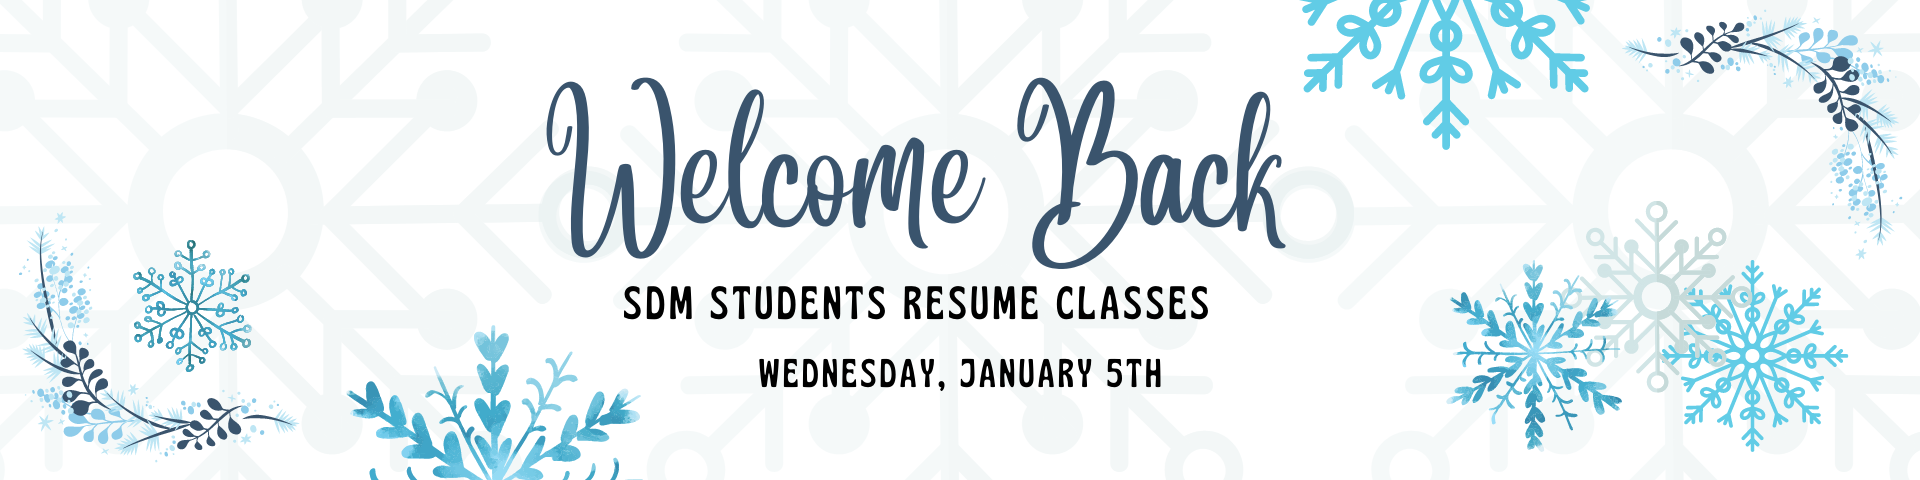 Welcome Back SDM Students resume class on Wednesday January 5th